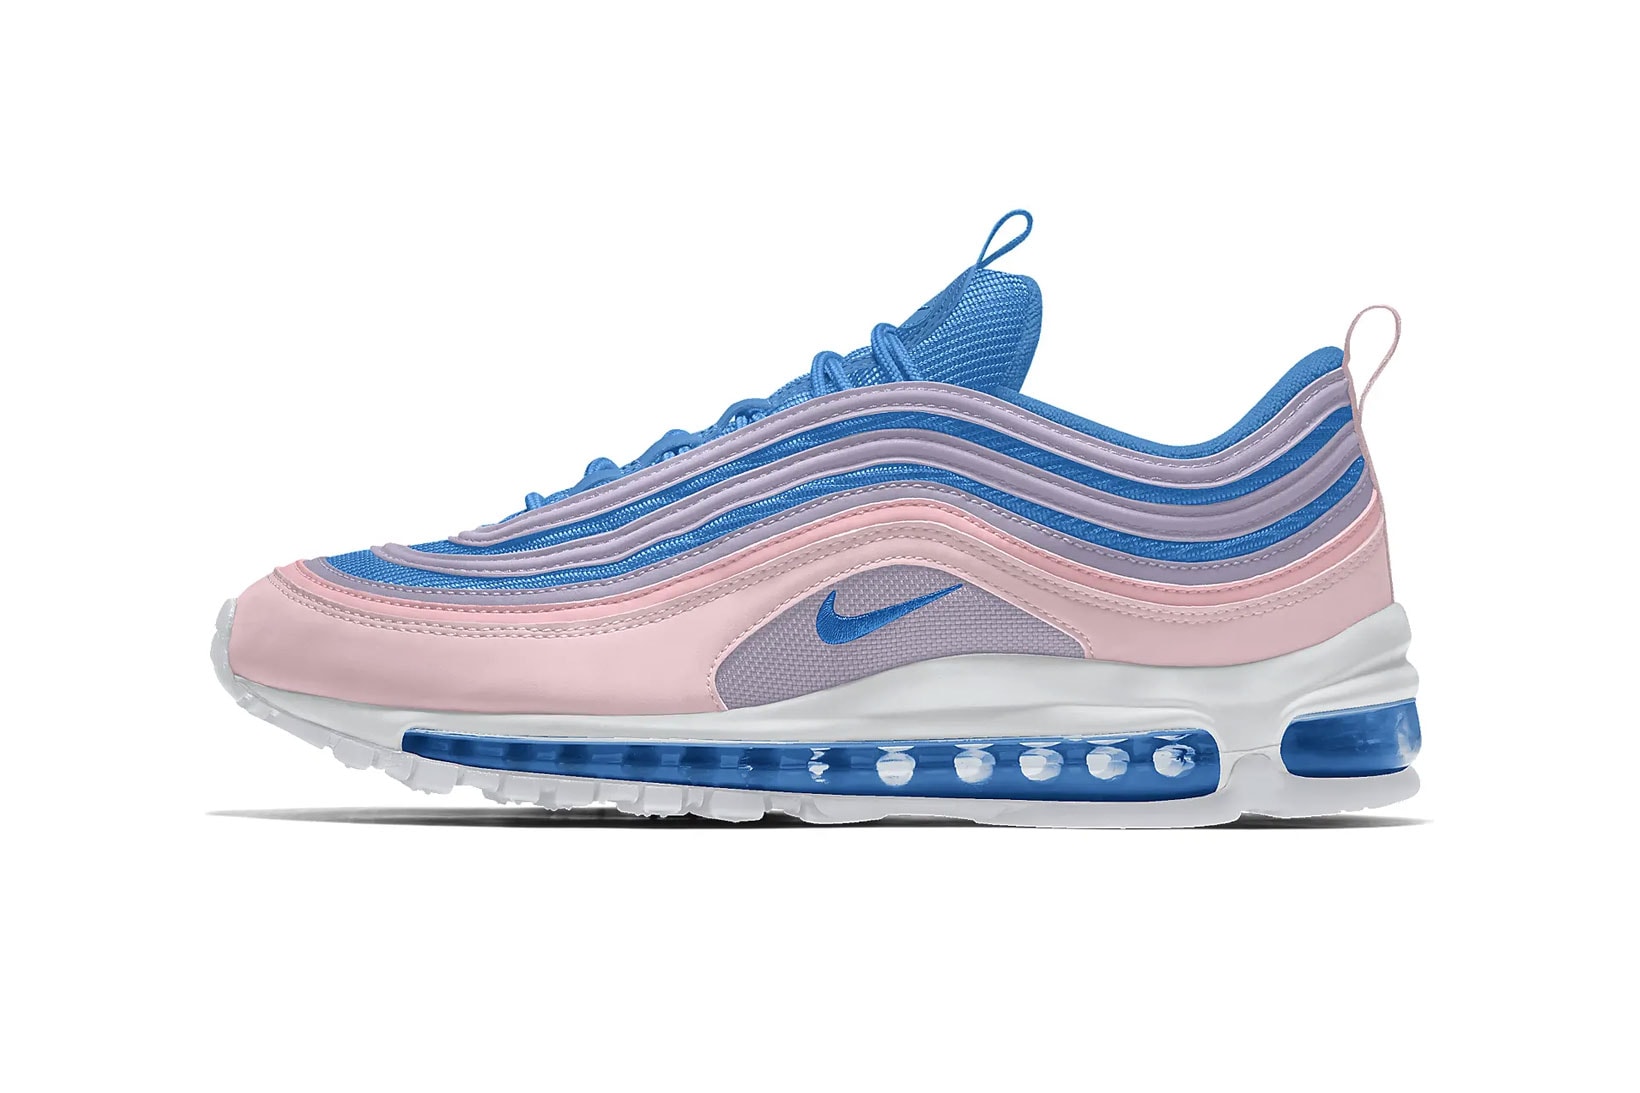 nike by you air max 97 am97 pink blue pastel